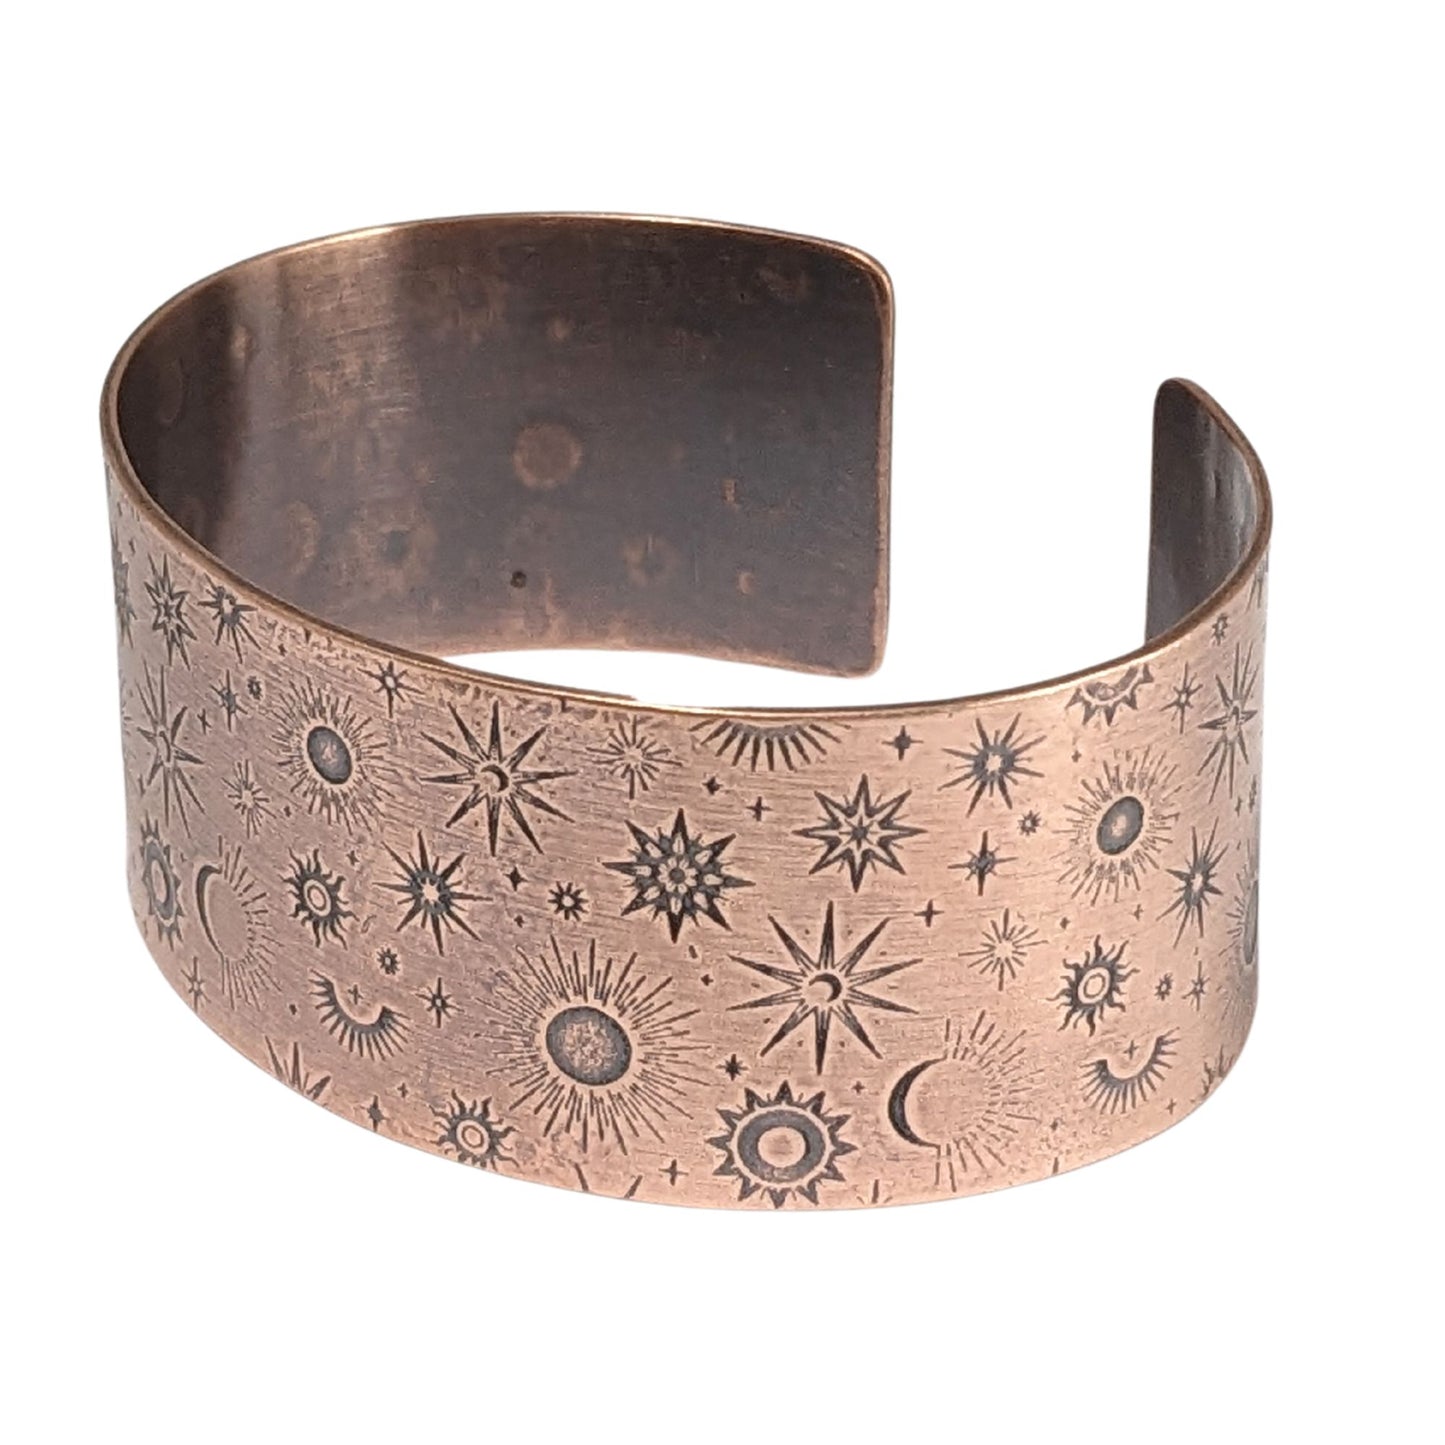 A one inch wide copper cuff bracelet covered in an impressed design of stars and planets.